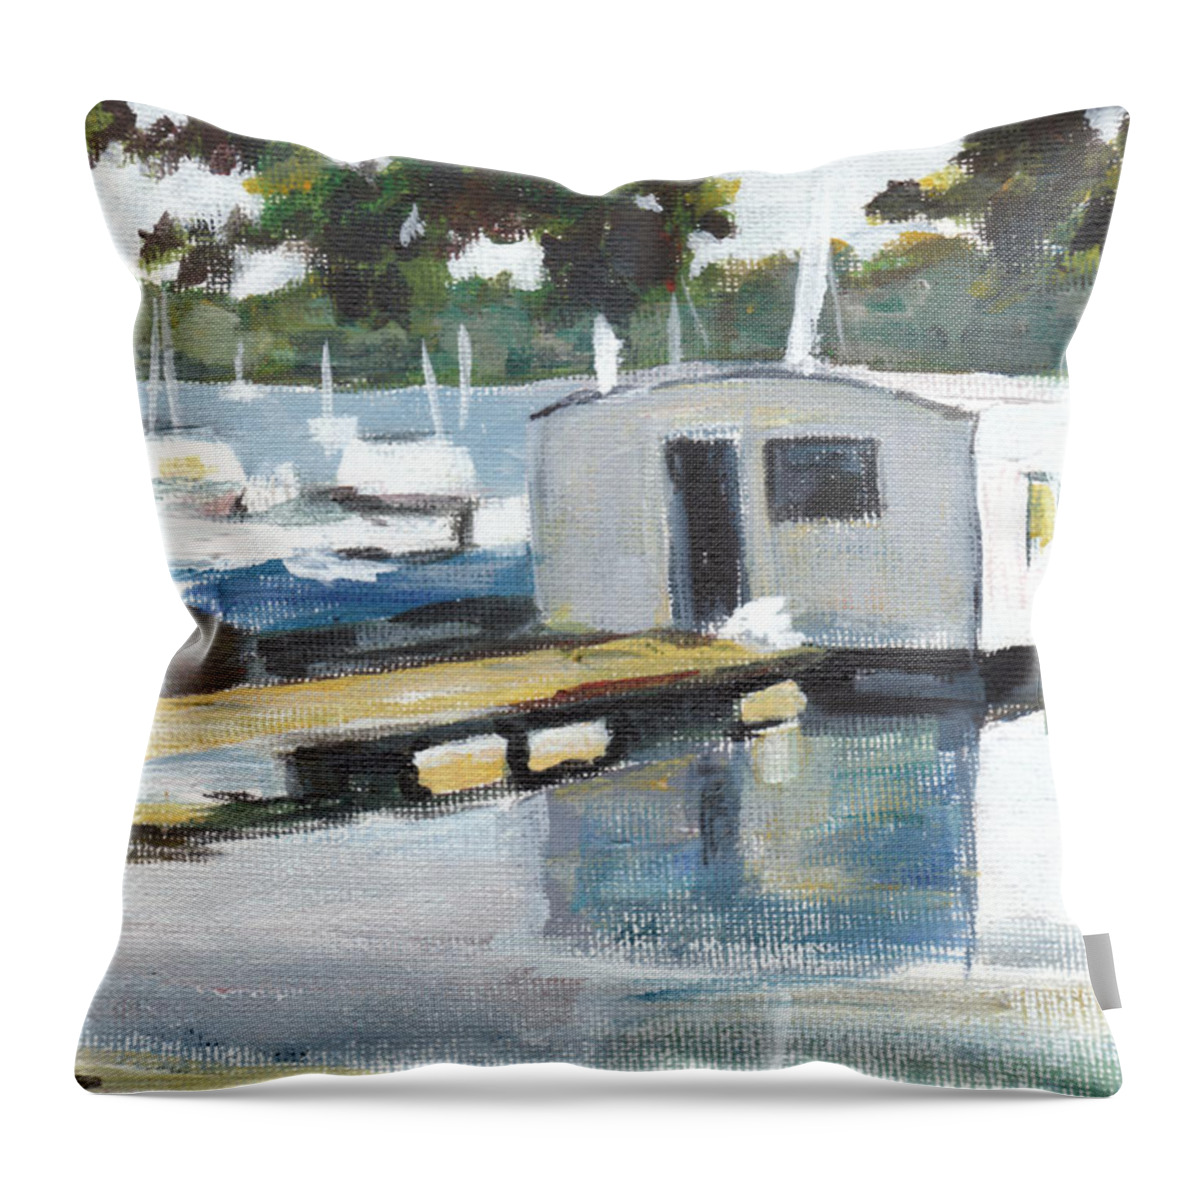 River Throw Pillow featuring the painting Smugglers' Cove by Sarah Lynch